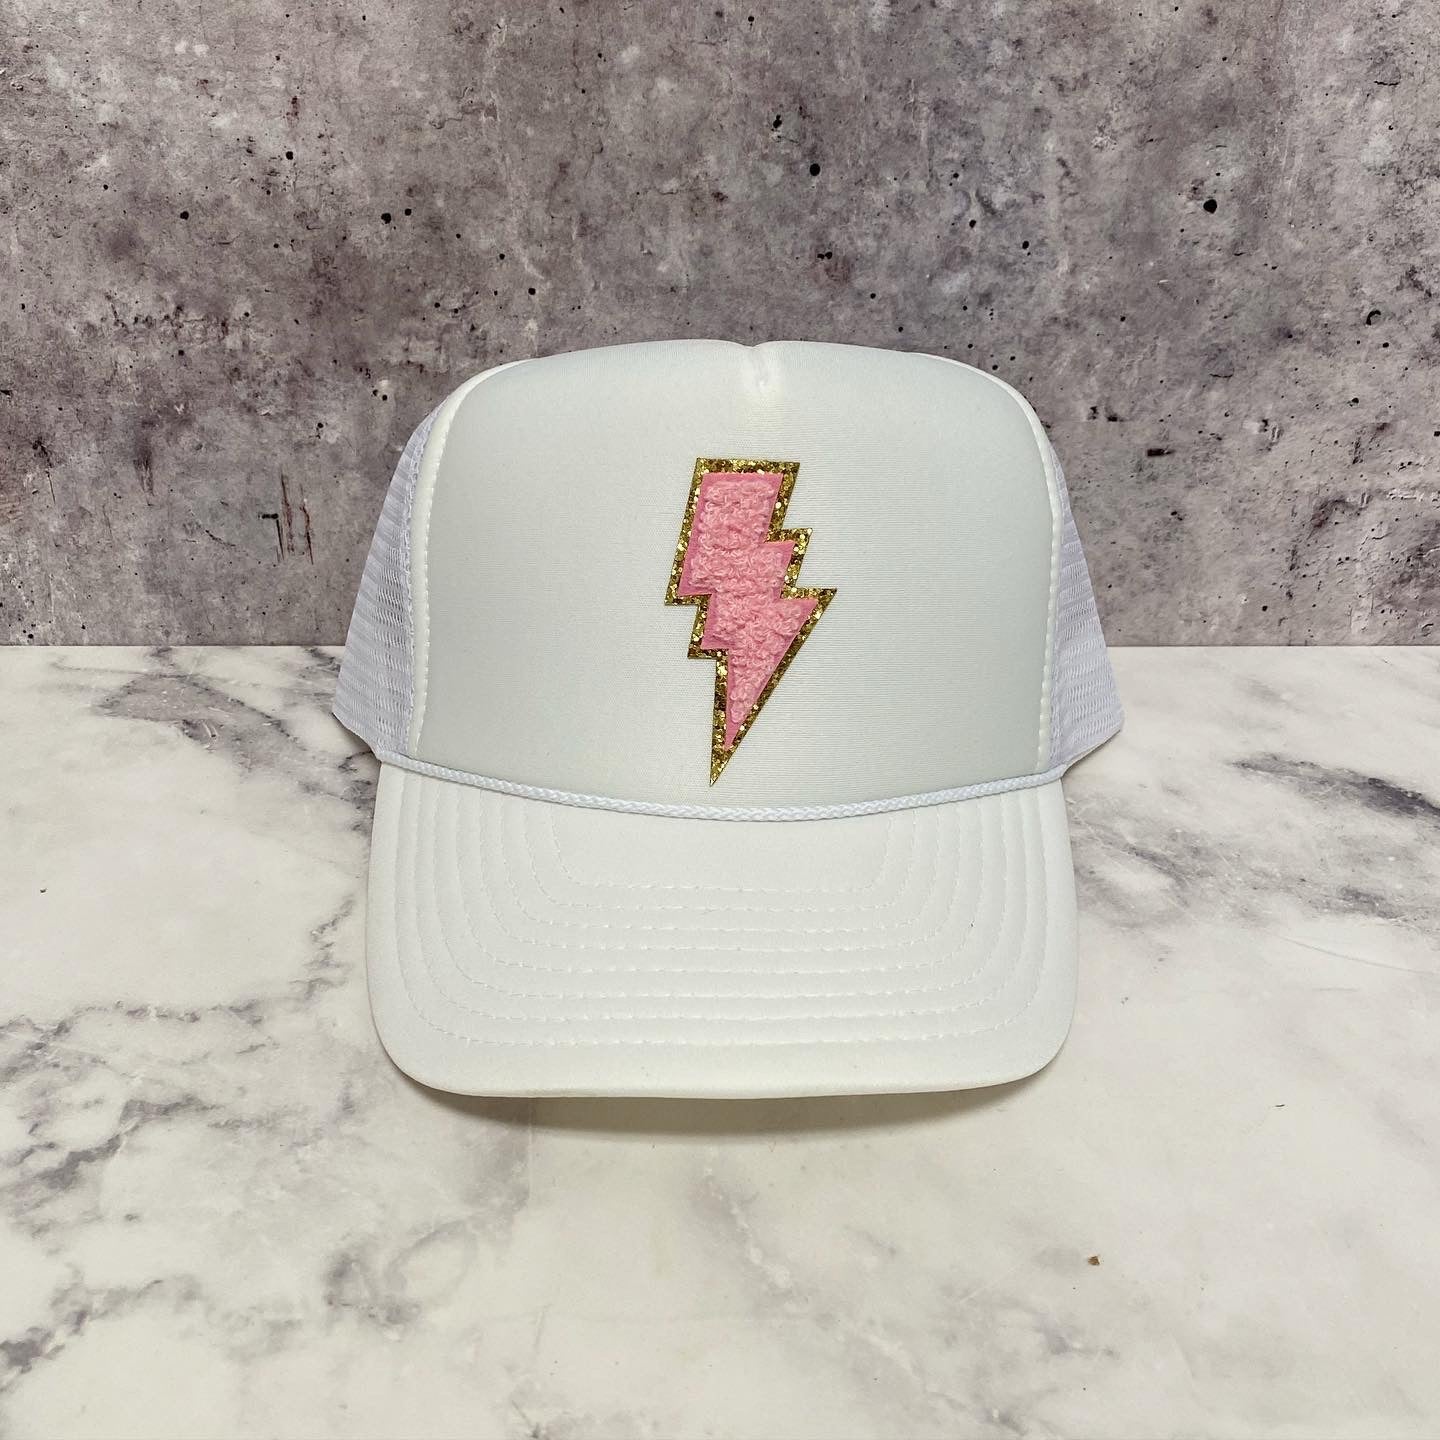 Trucker Hat with Pink Bolt Patch